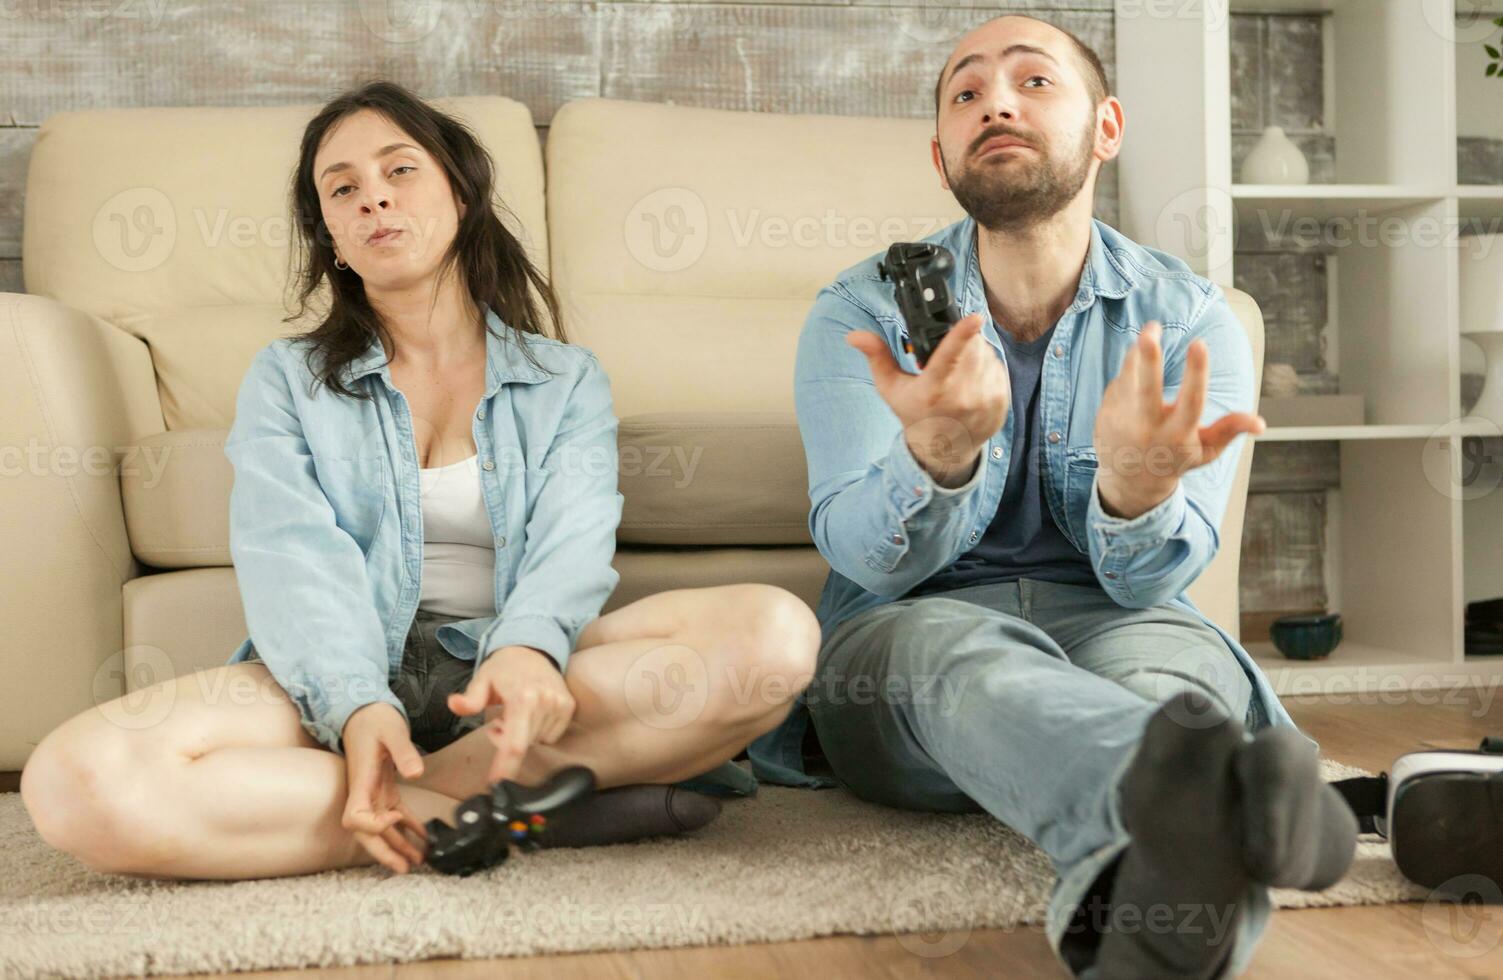 Couple losing at online video games using wireless controllers. photo